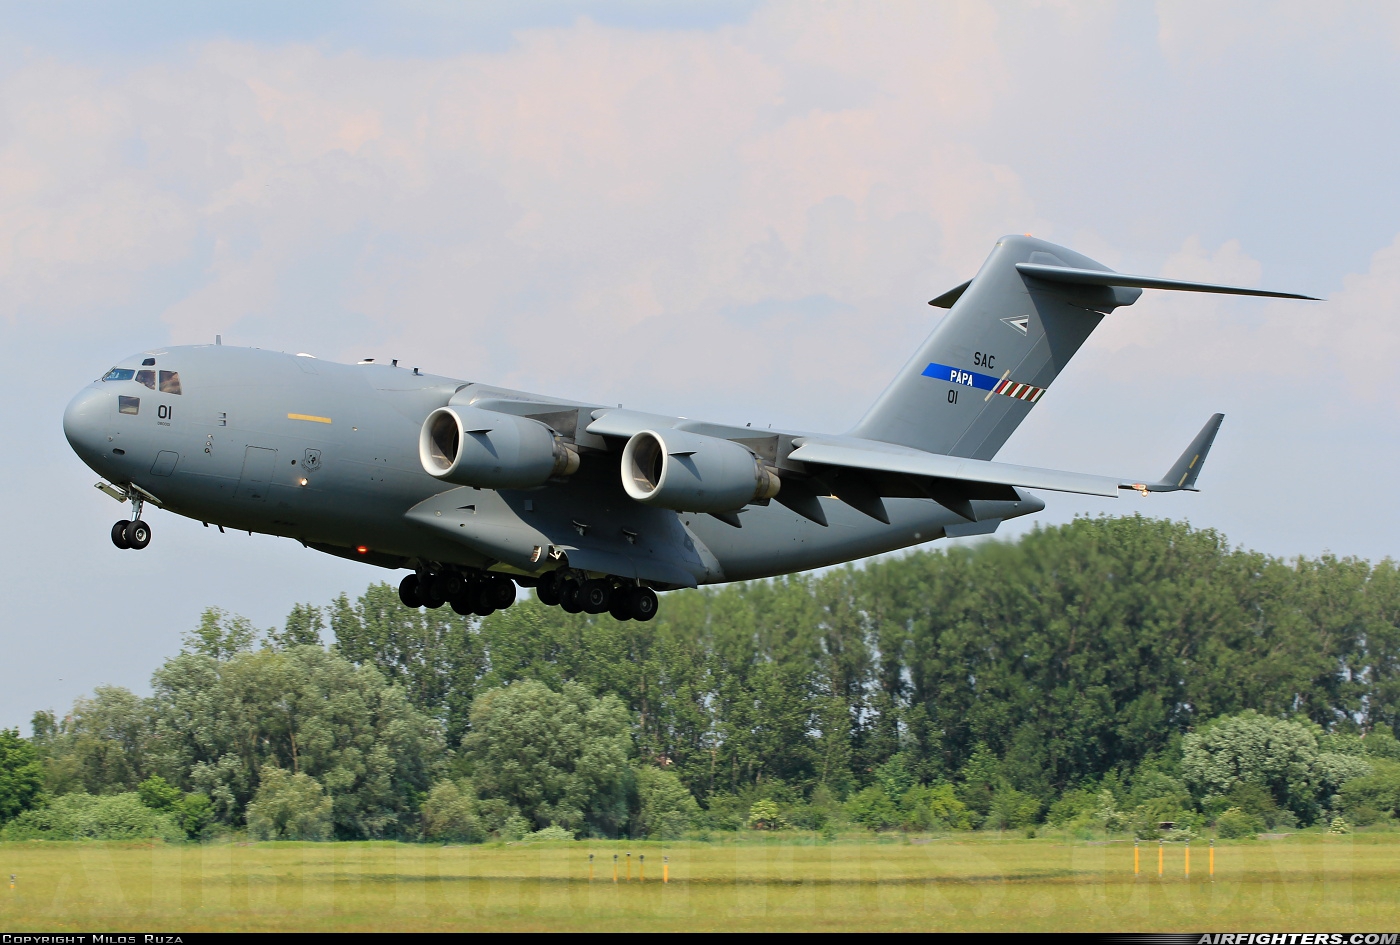 NATO - Strategic Airlift Capability Boeing C-17A Globemaster III 08-0001 at Pardubice (PED / LKPD), Czech Republic